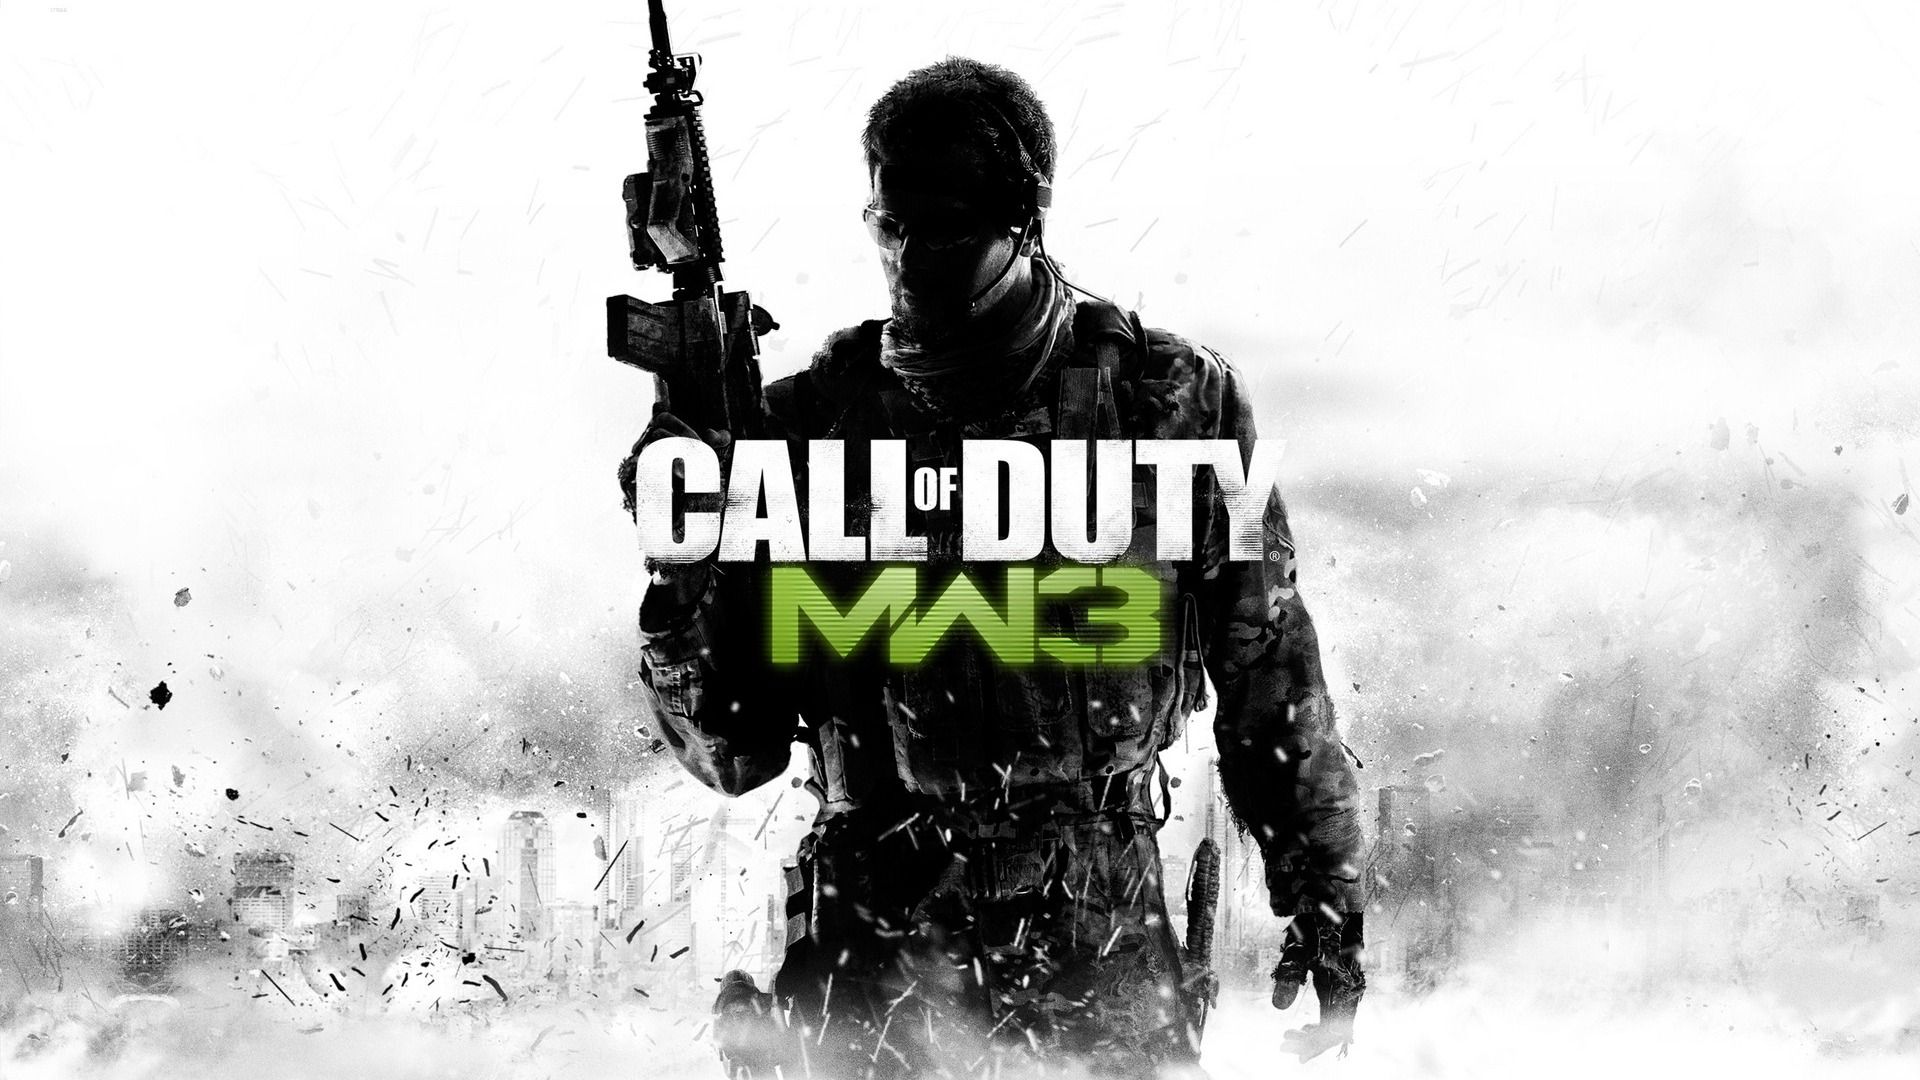 HD Quality War Game Call of Duty MW3 Wallpapers 3 Full Size